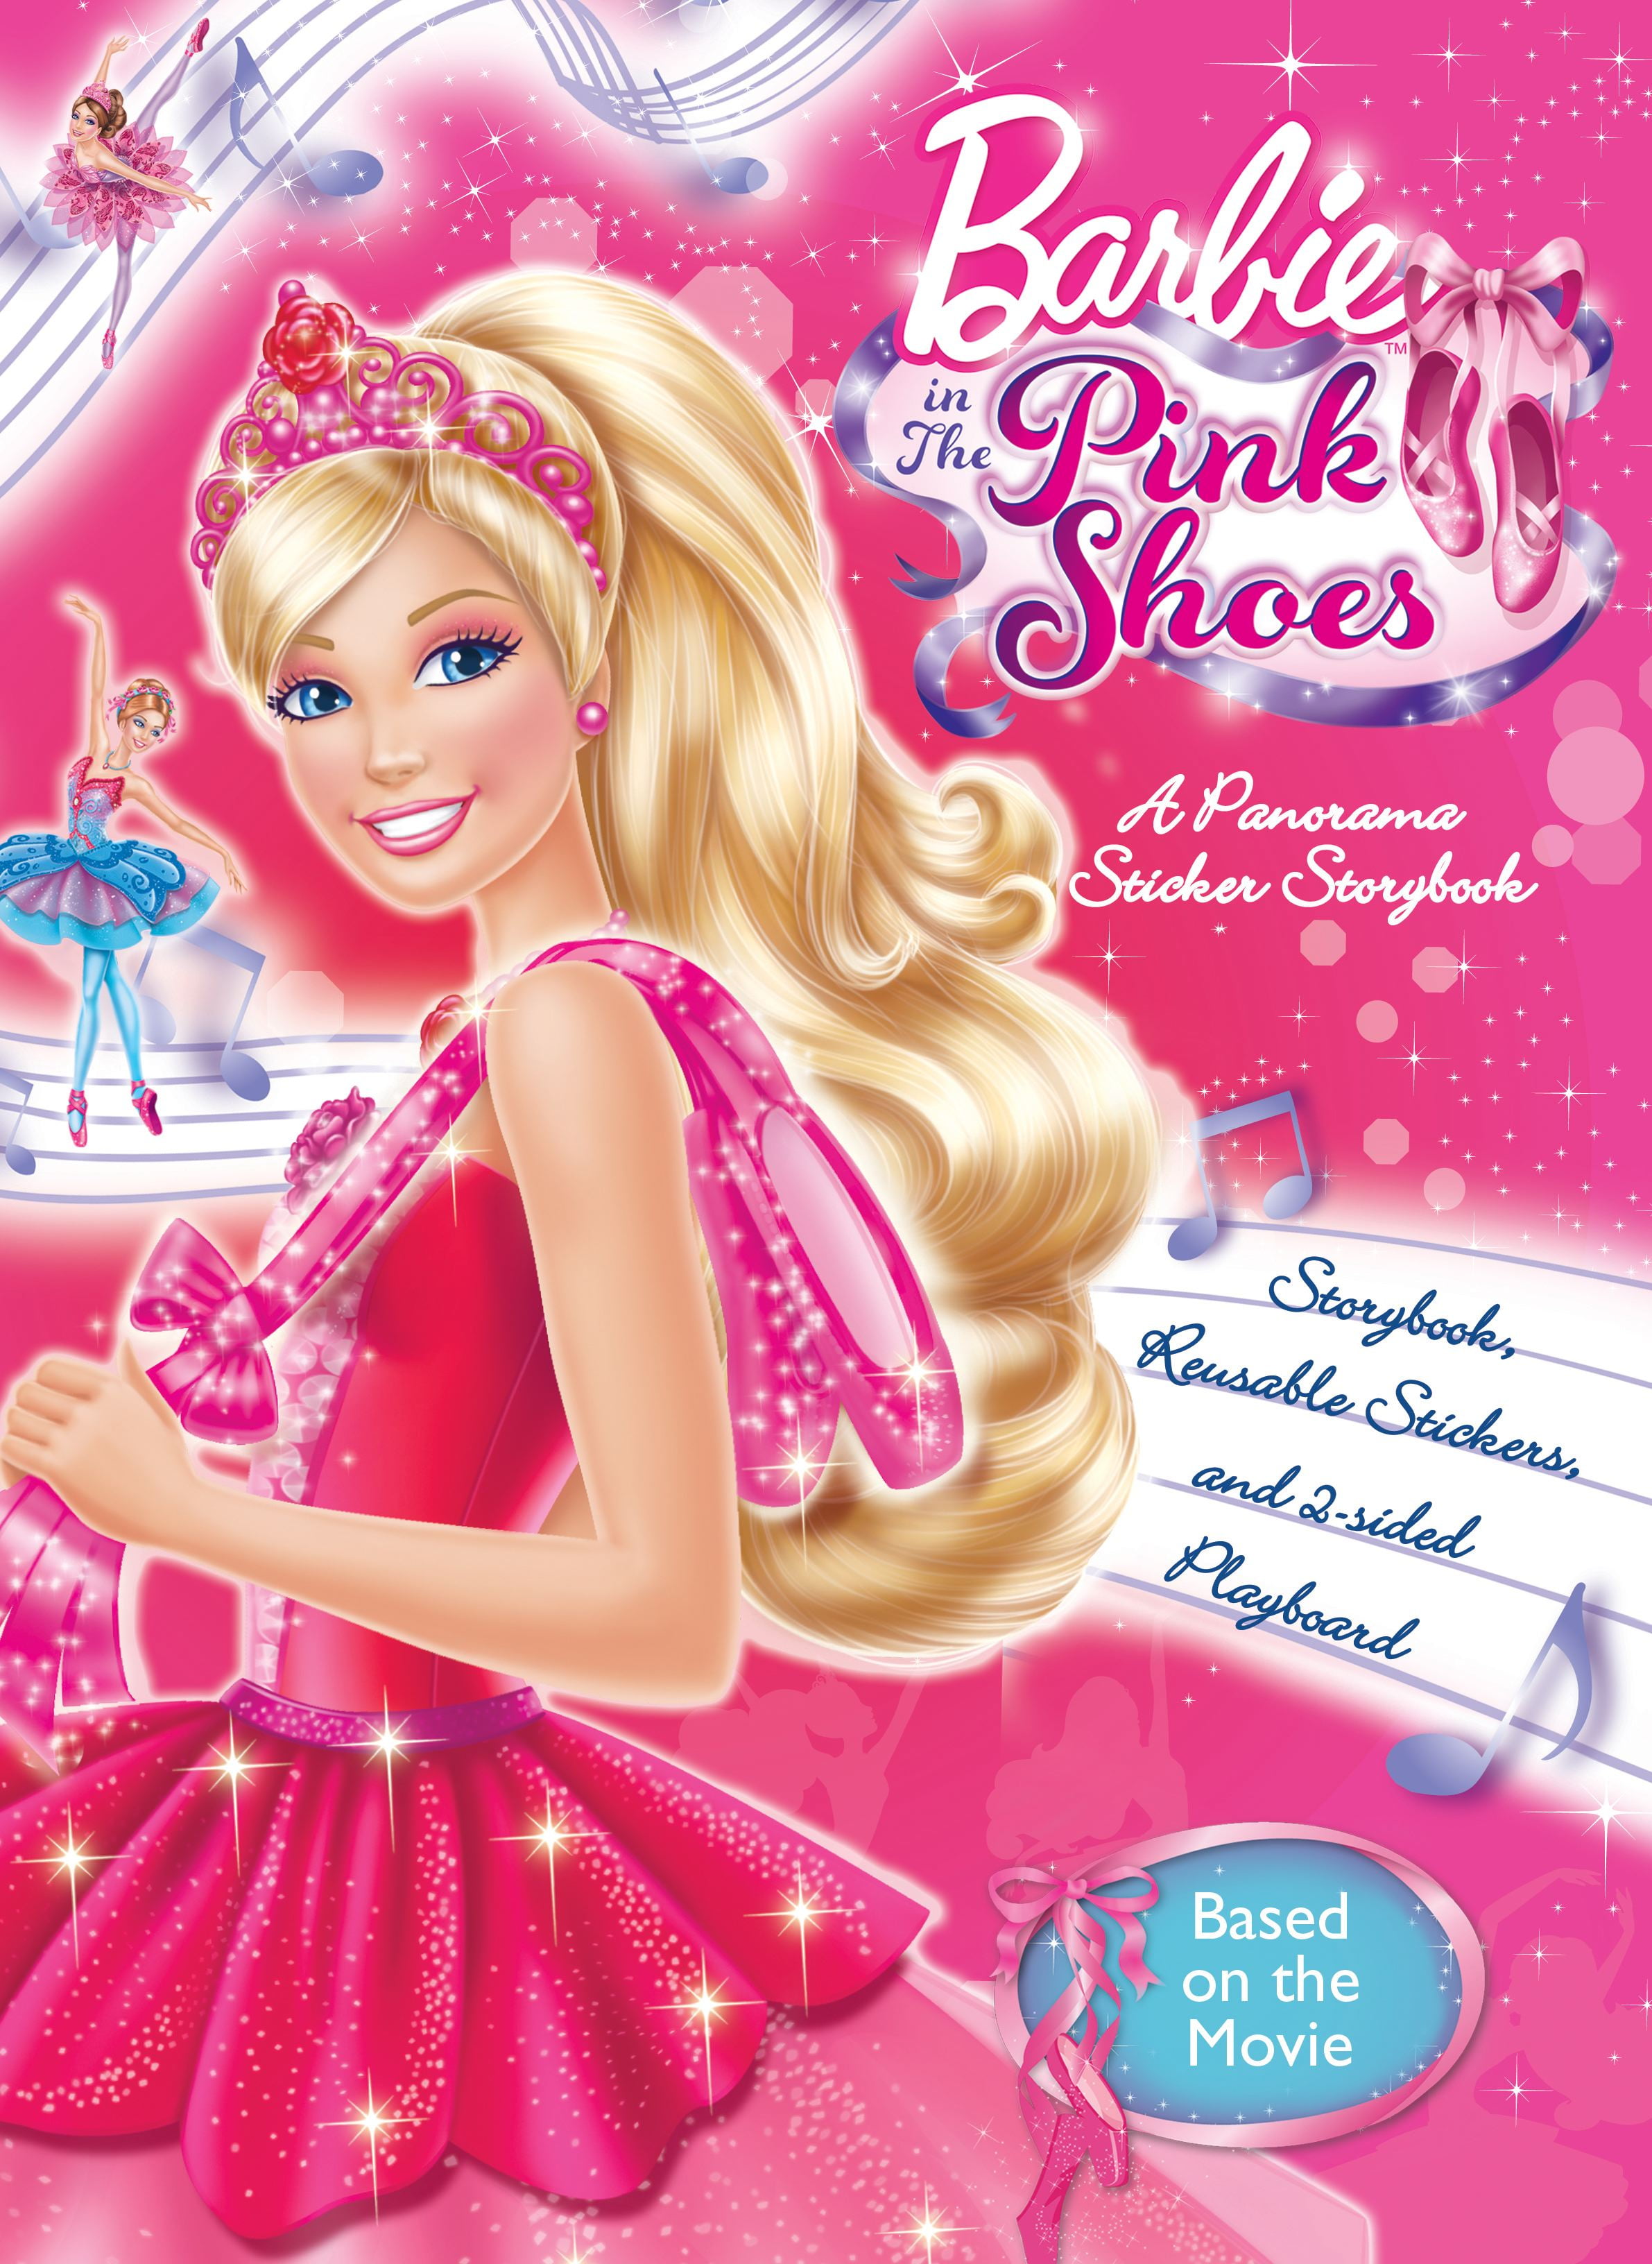 Barbie coloring book Colorful Story (pink shoes)(Chinese Edition) by MEI  TAI: New paperback